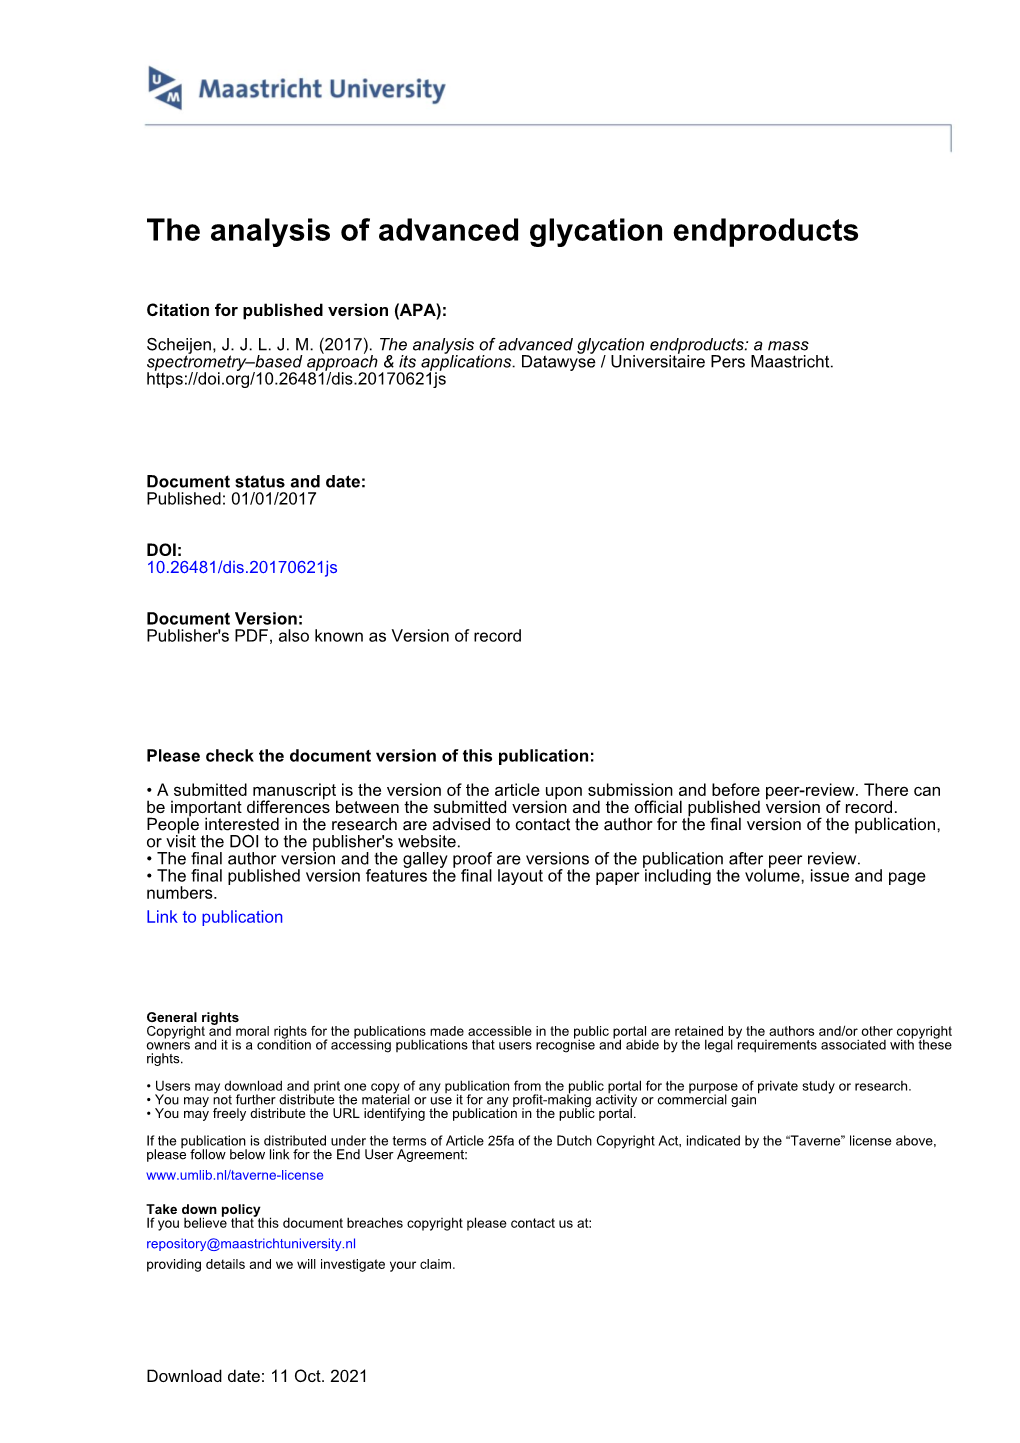 The Analysis of Advanced Glycation Endproducts